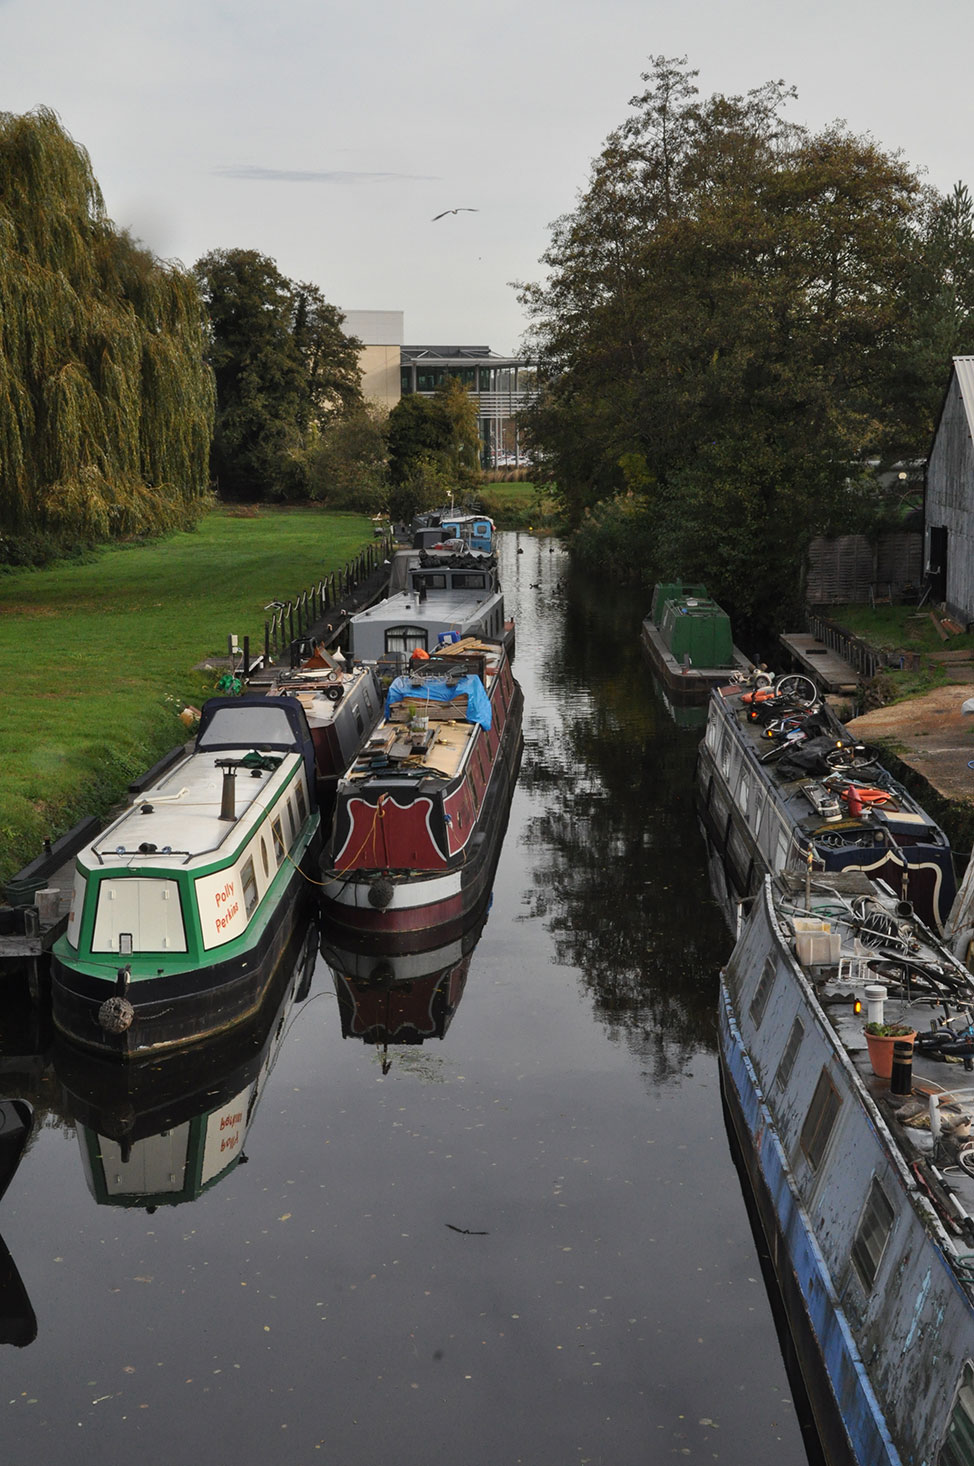 View from above of houseboats along the Grand Union Canal in Uxbbridge, UK